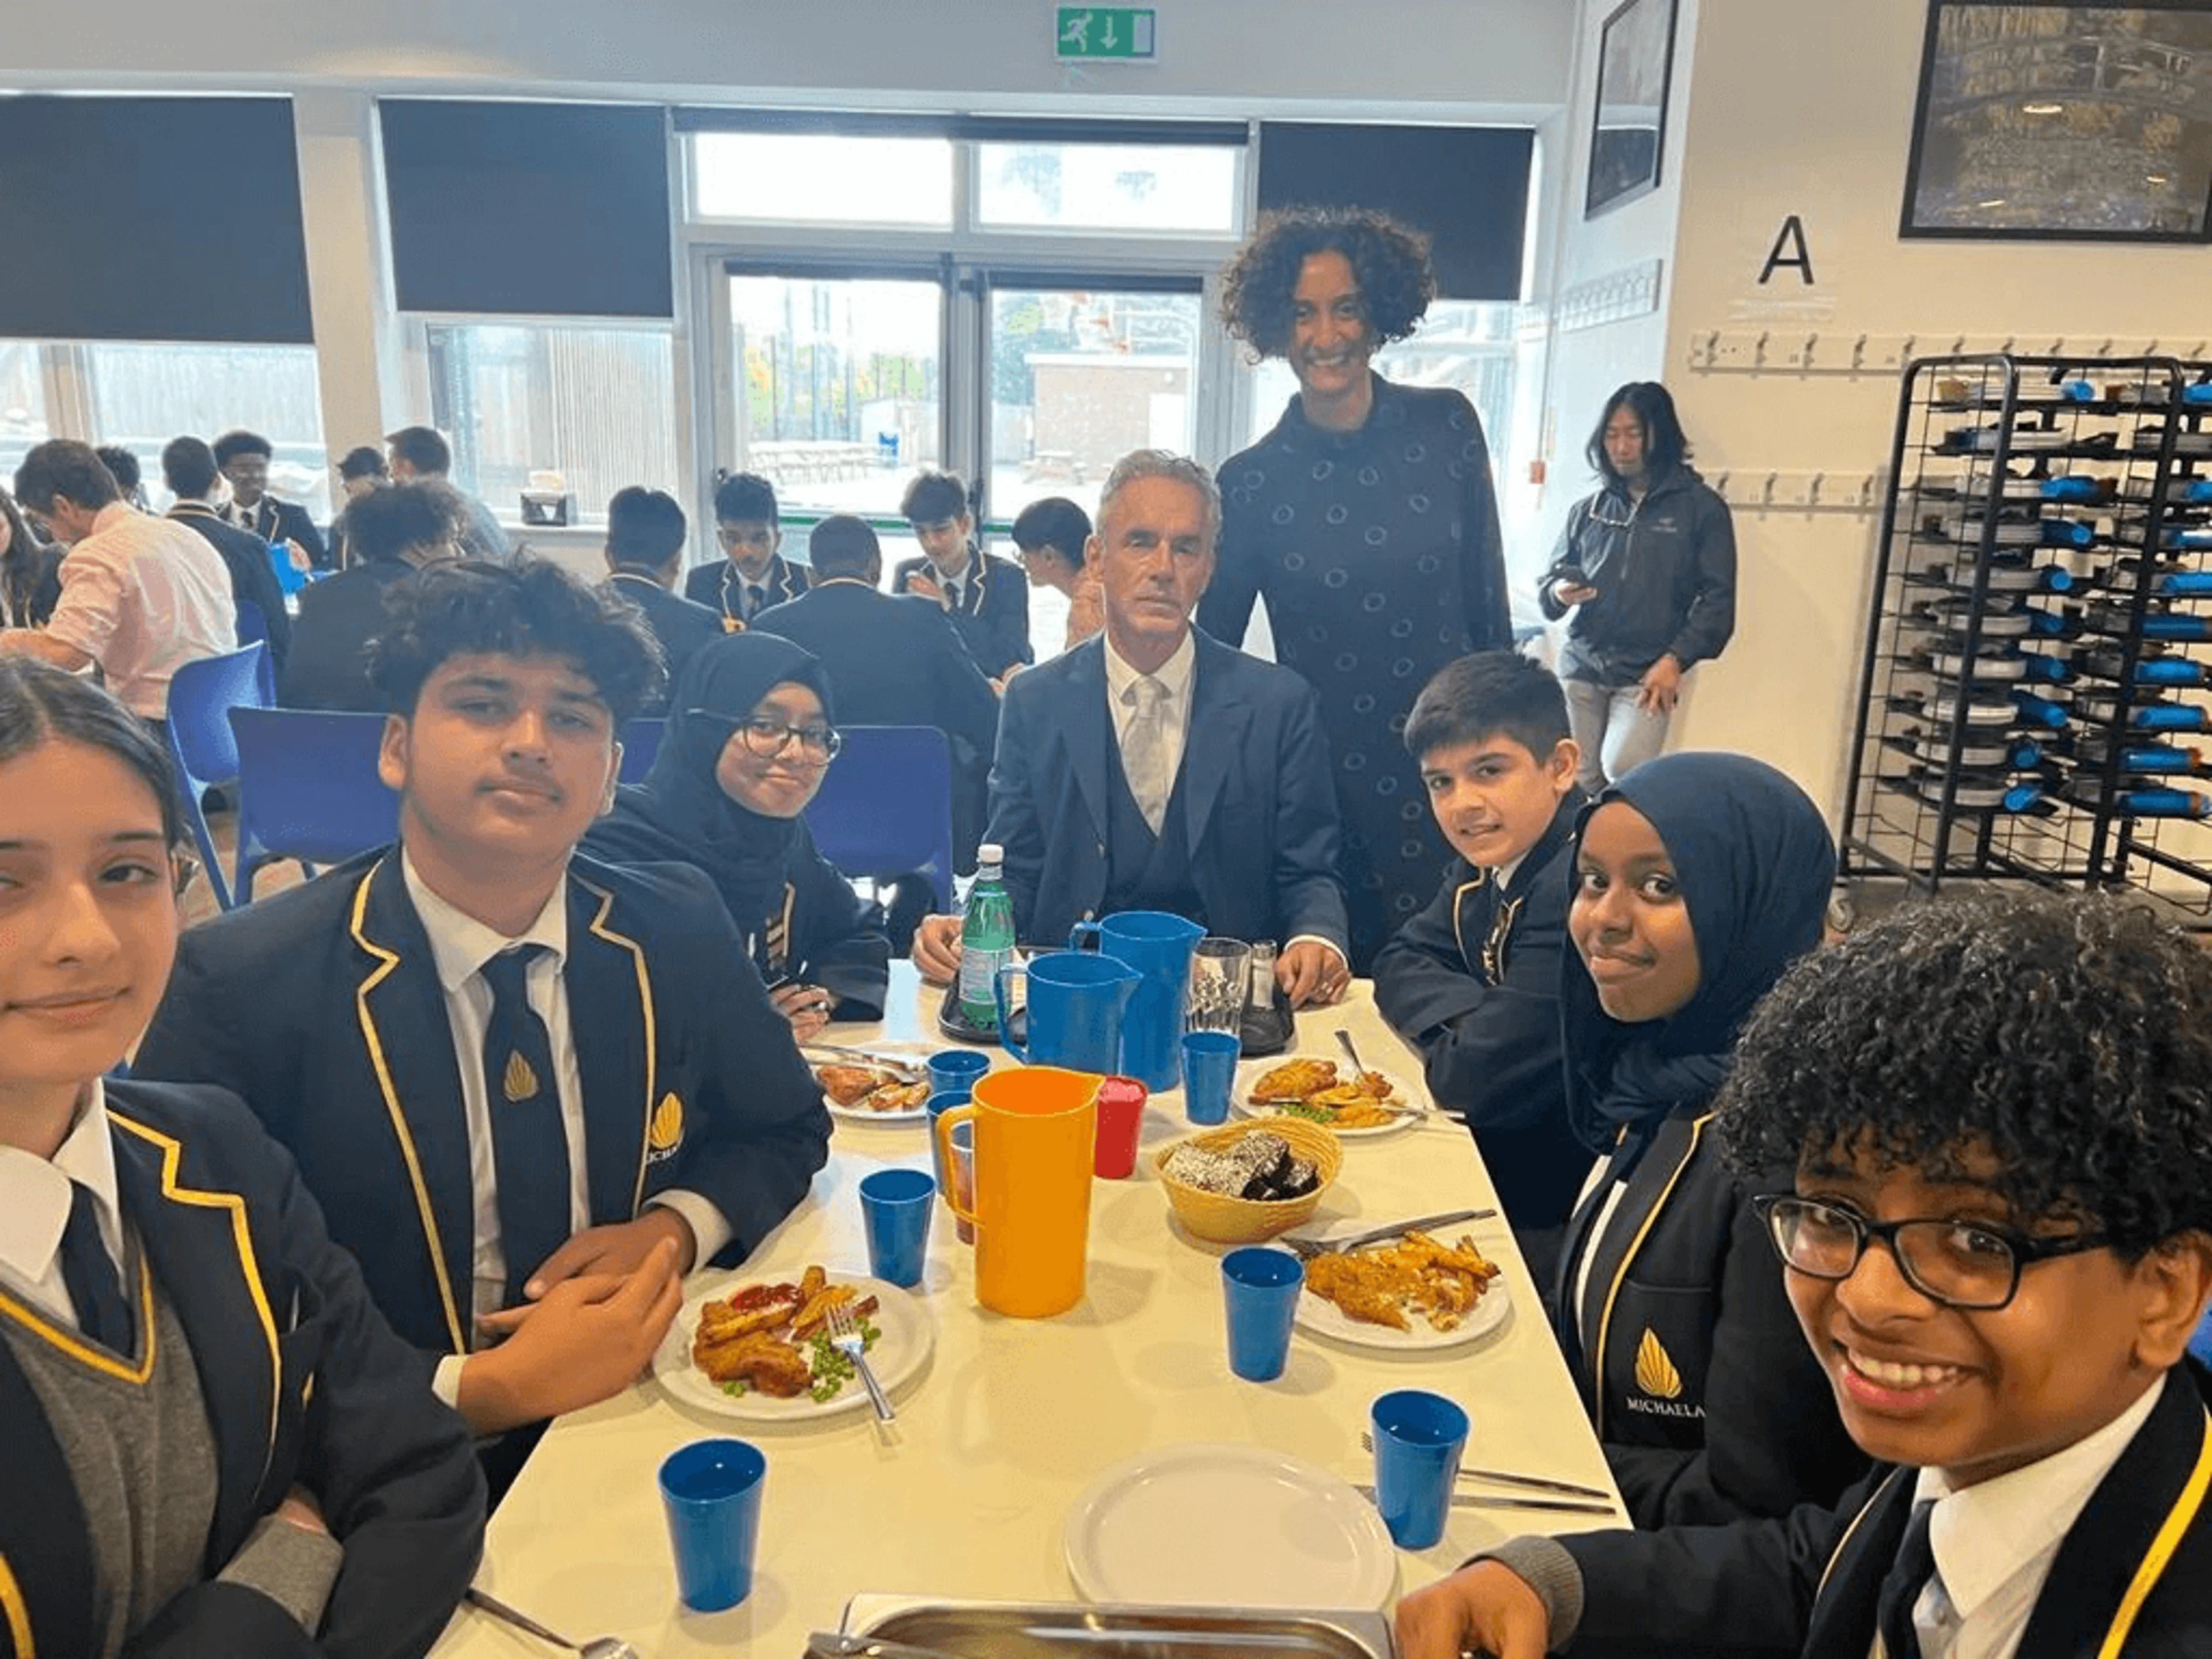 Jordan Peterson sits down with students at The Michaela Community School, whilst Katharine Birbalsingh stands behind him.